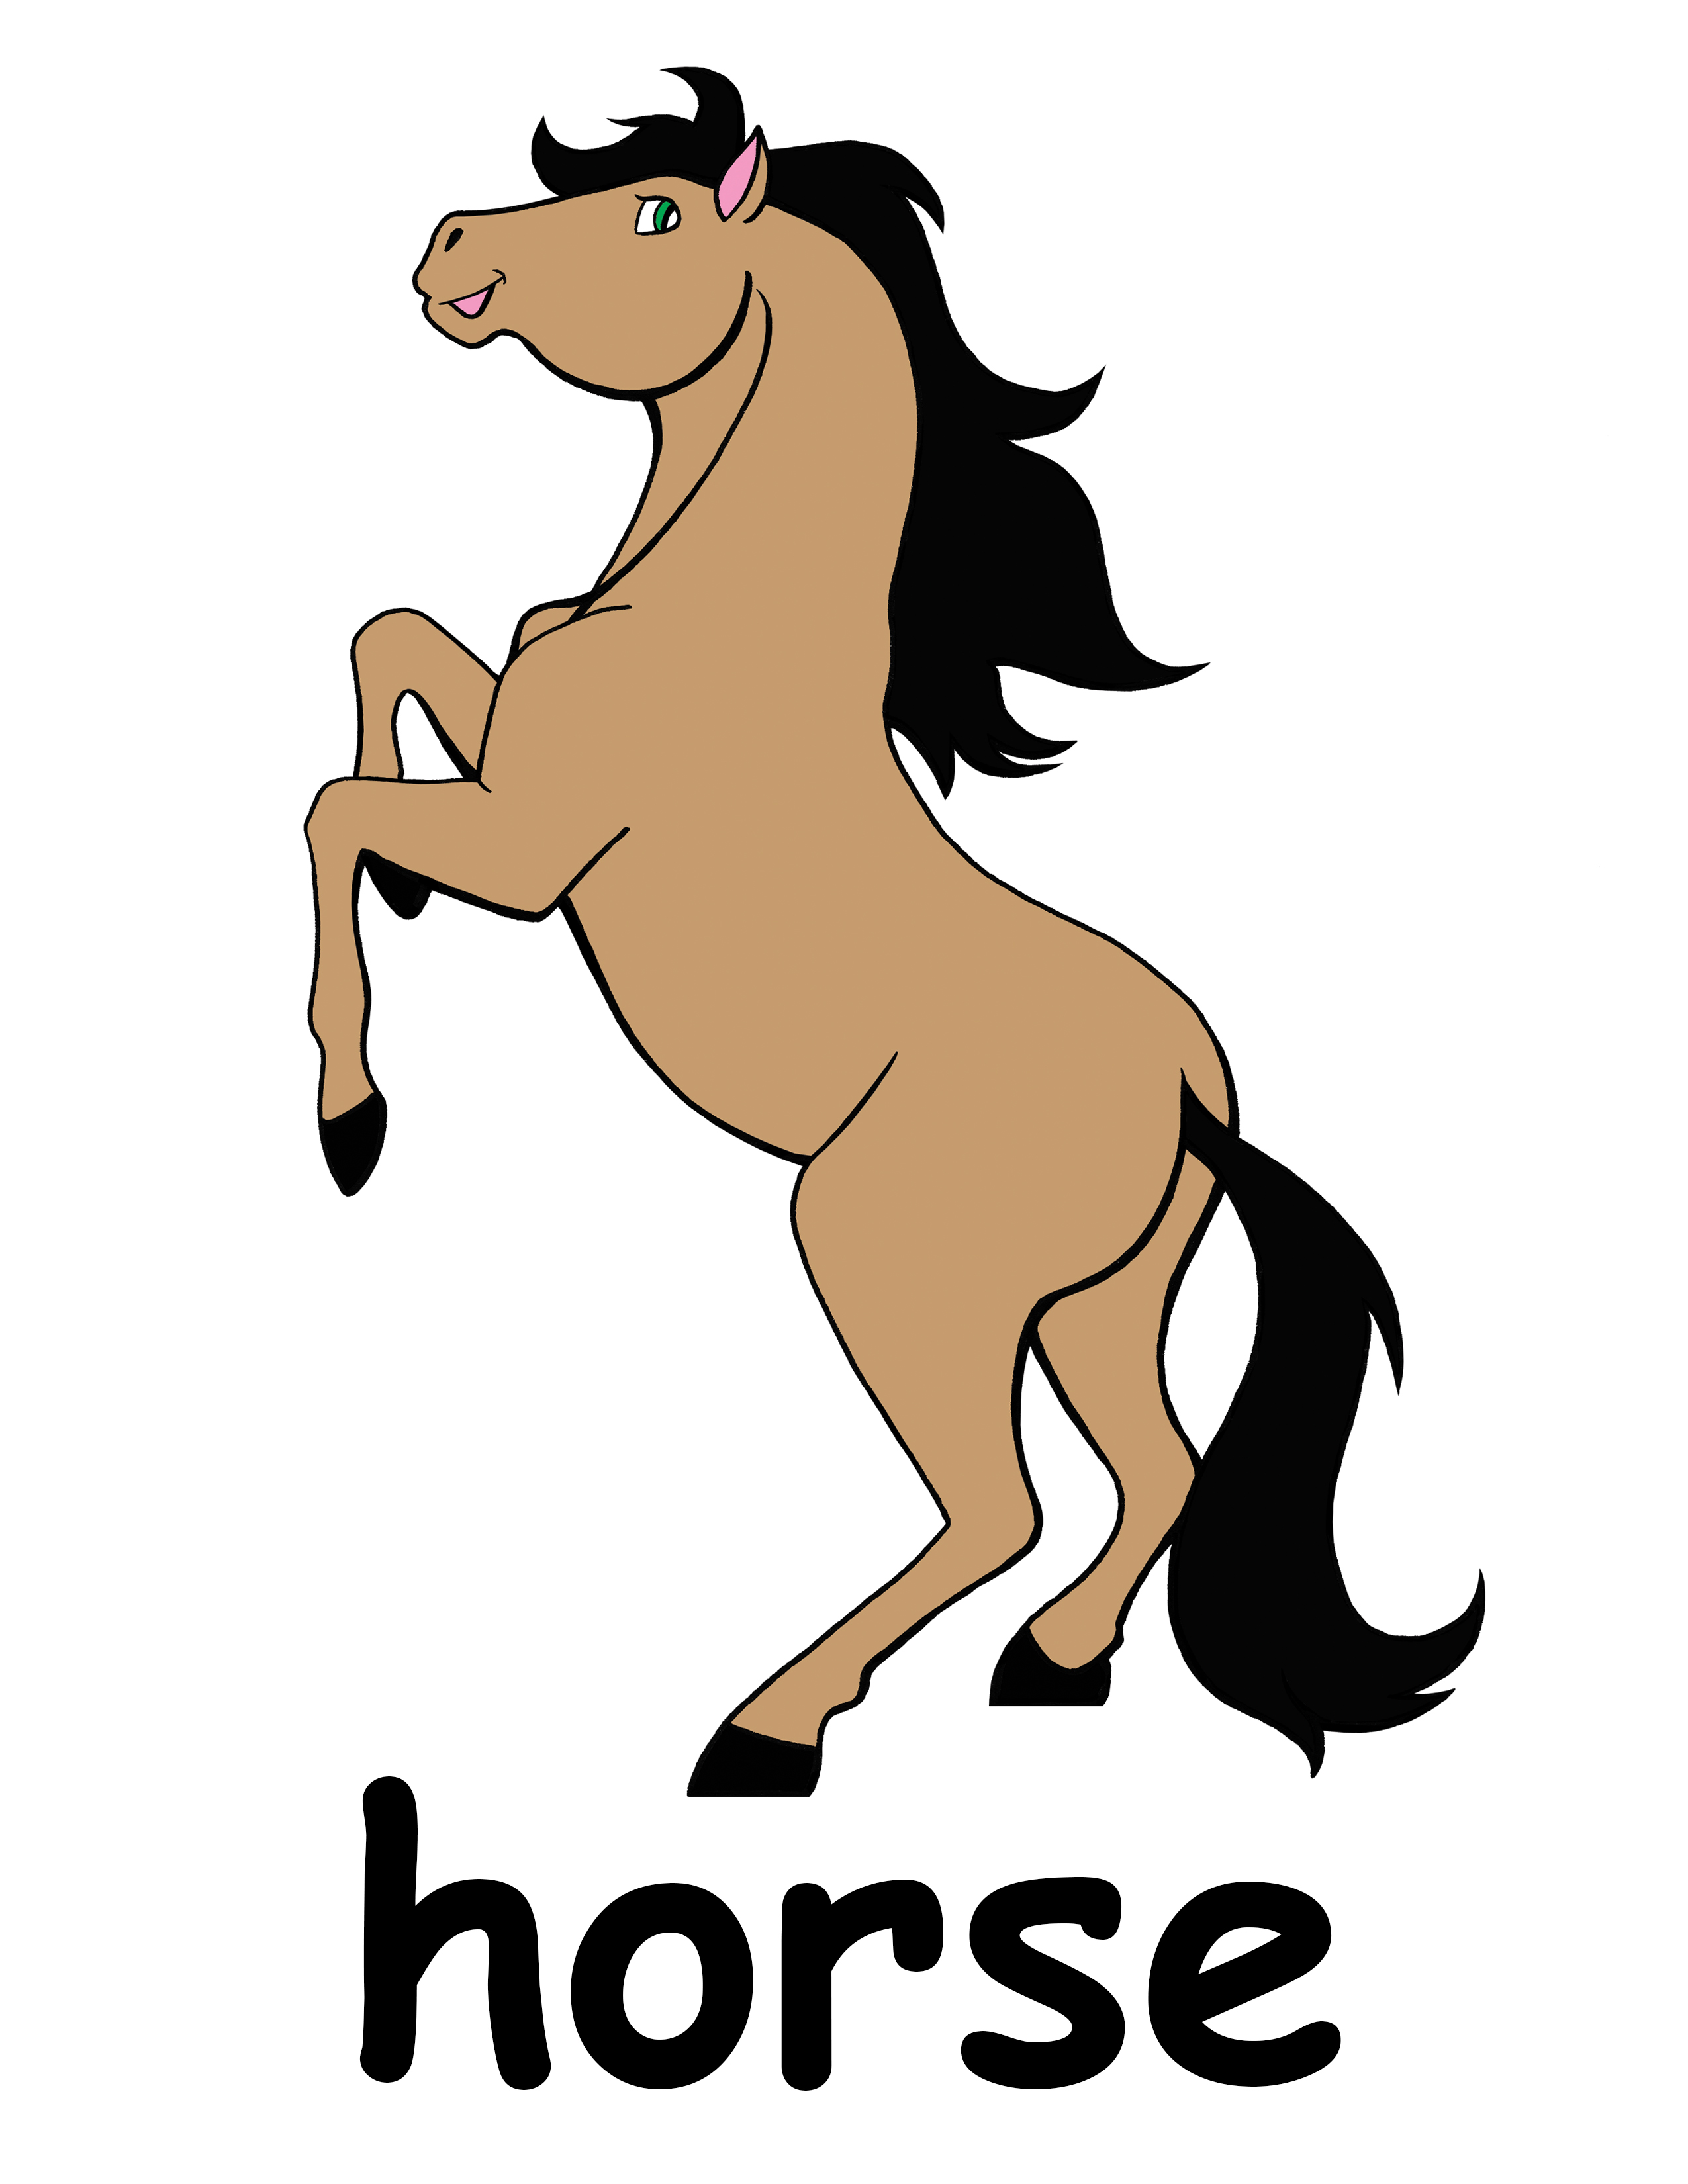 clipart image of a horse - photo #32